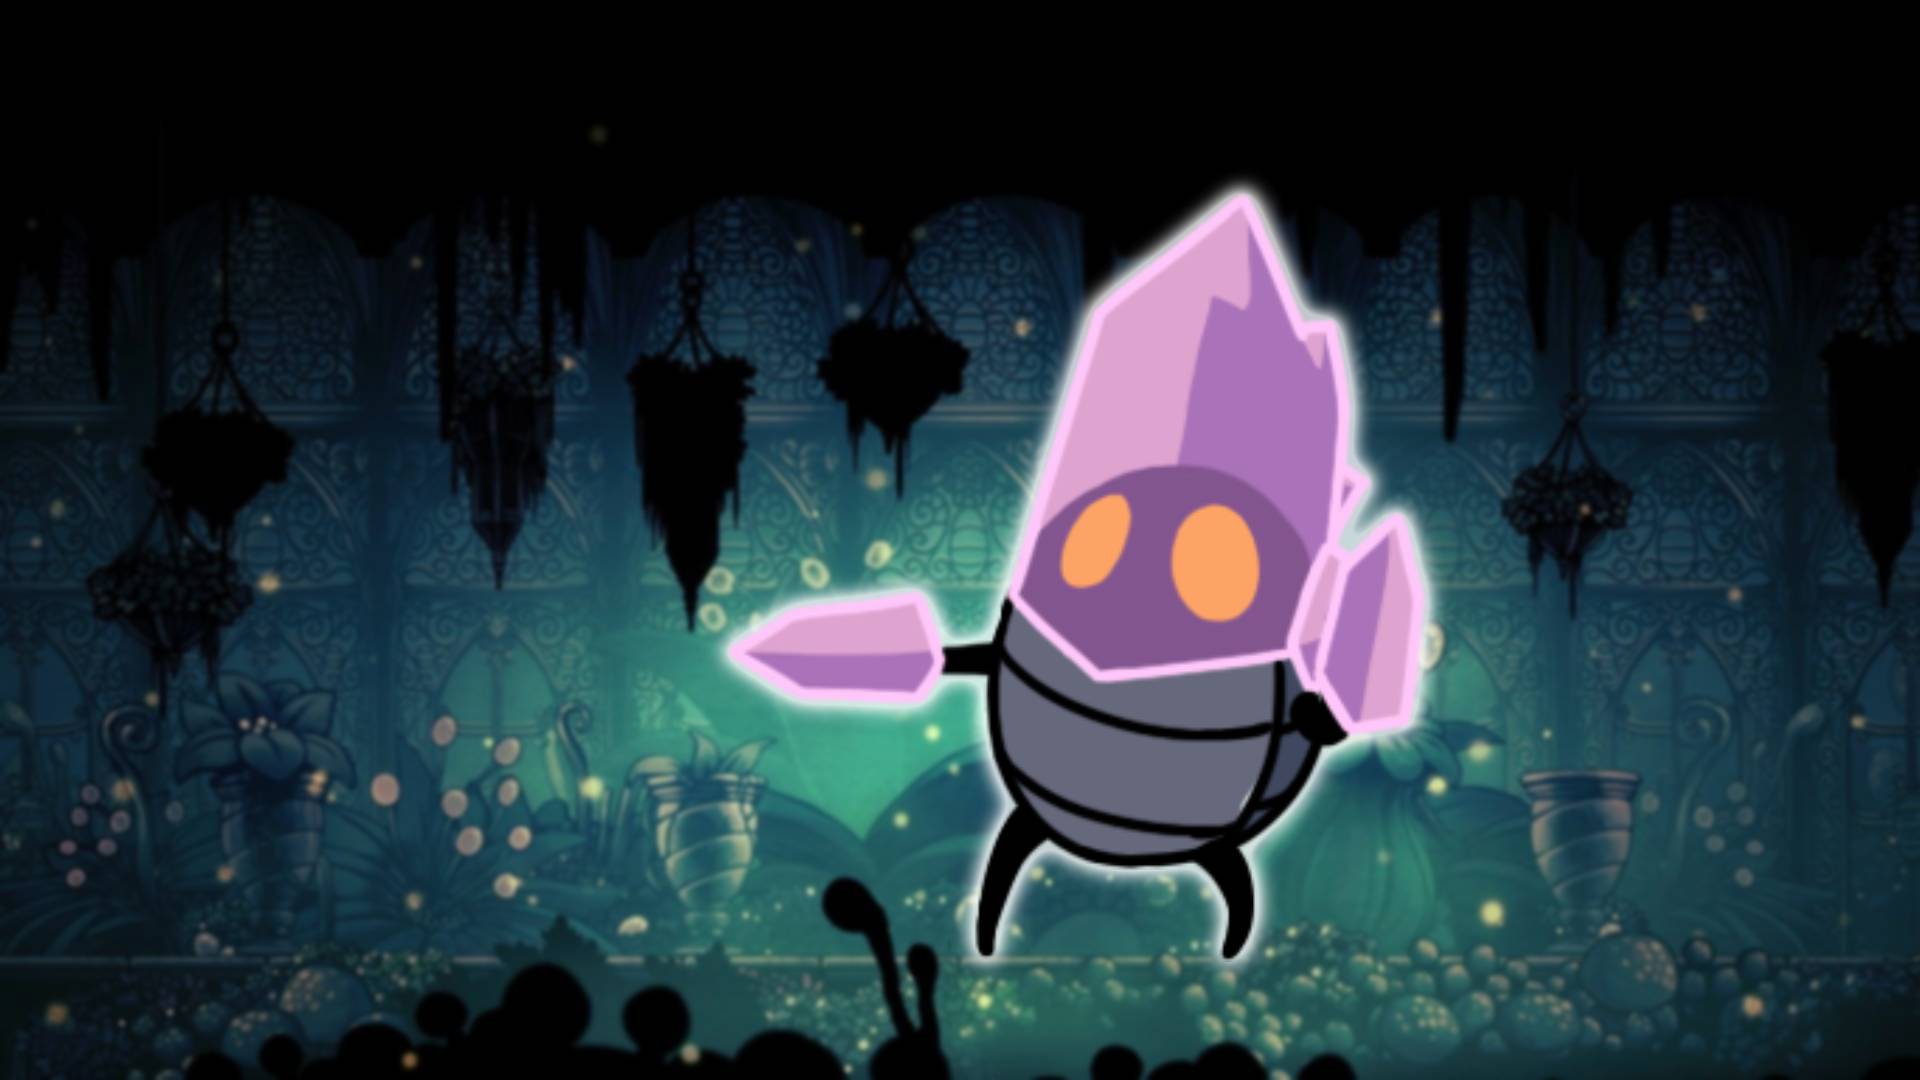 Crystal Guardian - the Hollow Knight boss, is visible against a mossy green background area from Hollow Knight 